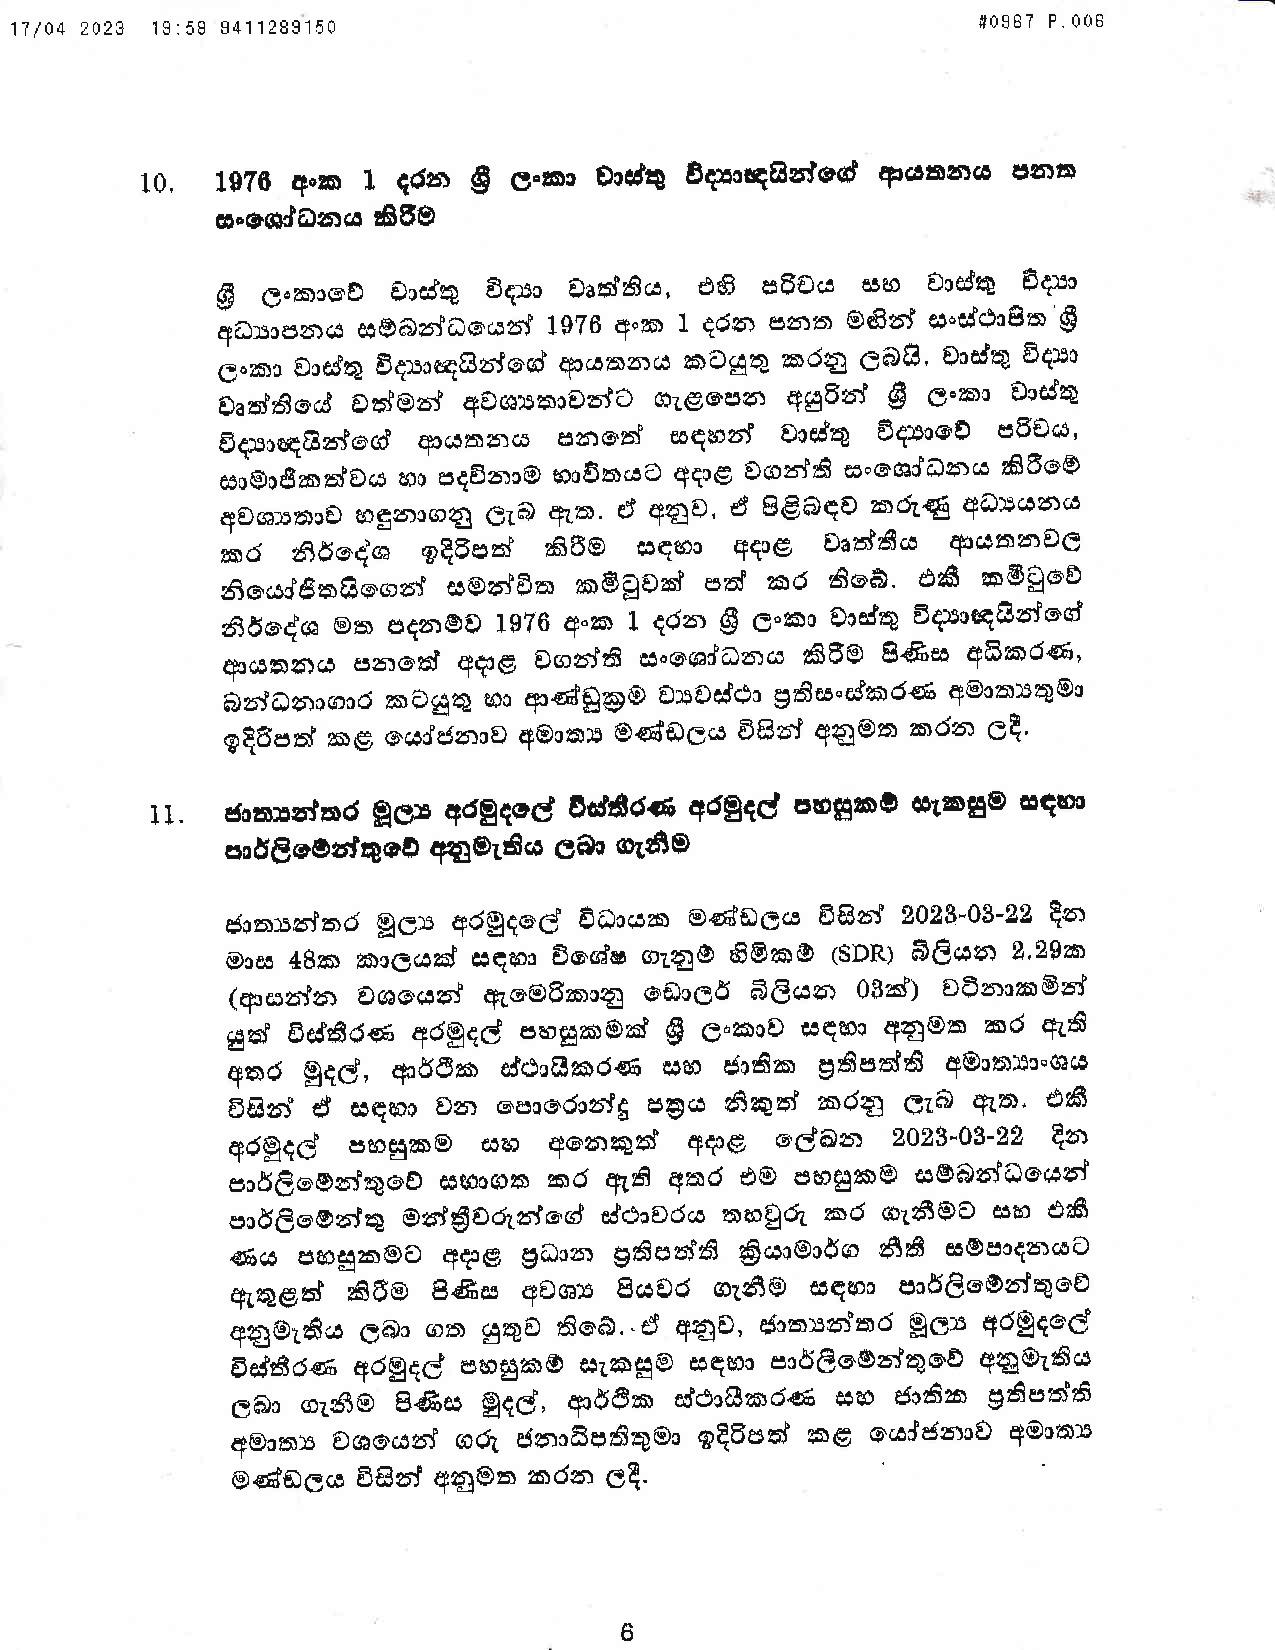 Cabinet Decisions on 17.04.2023 page 006